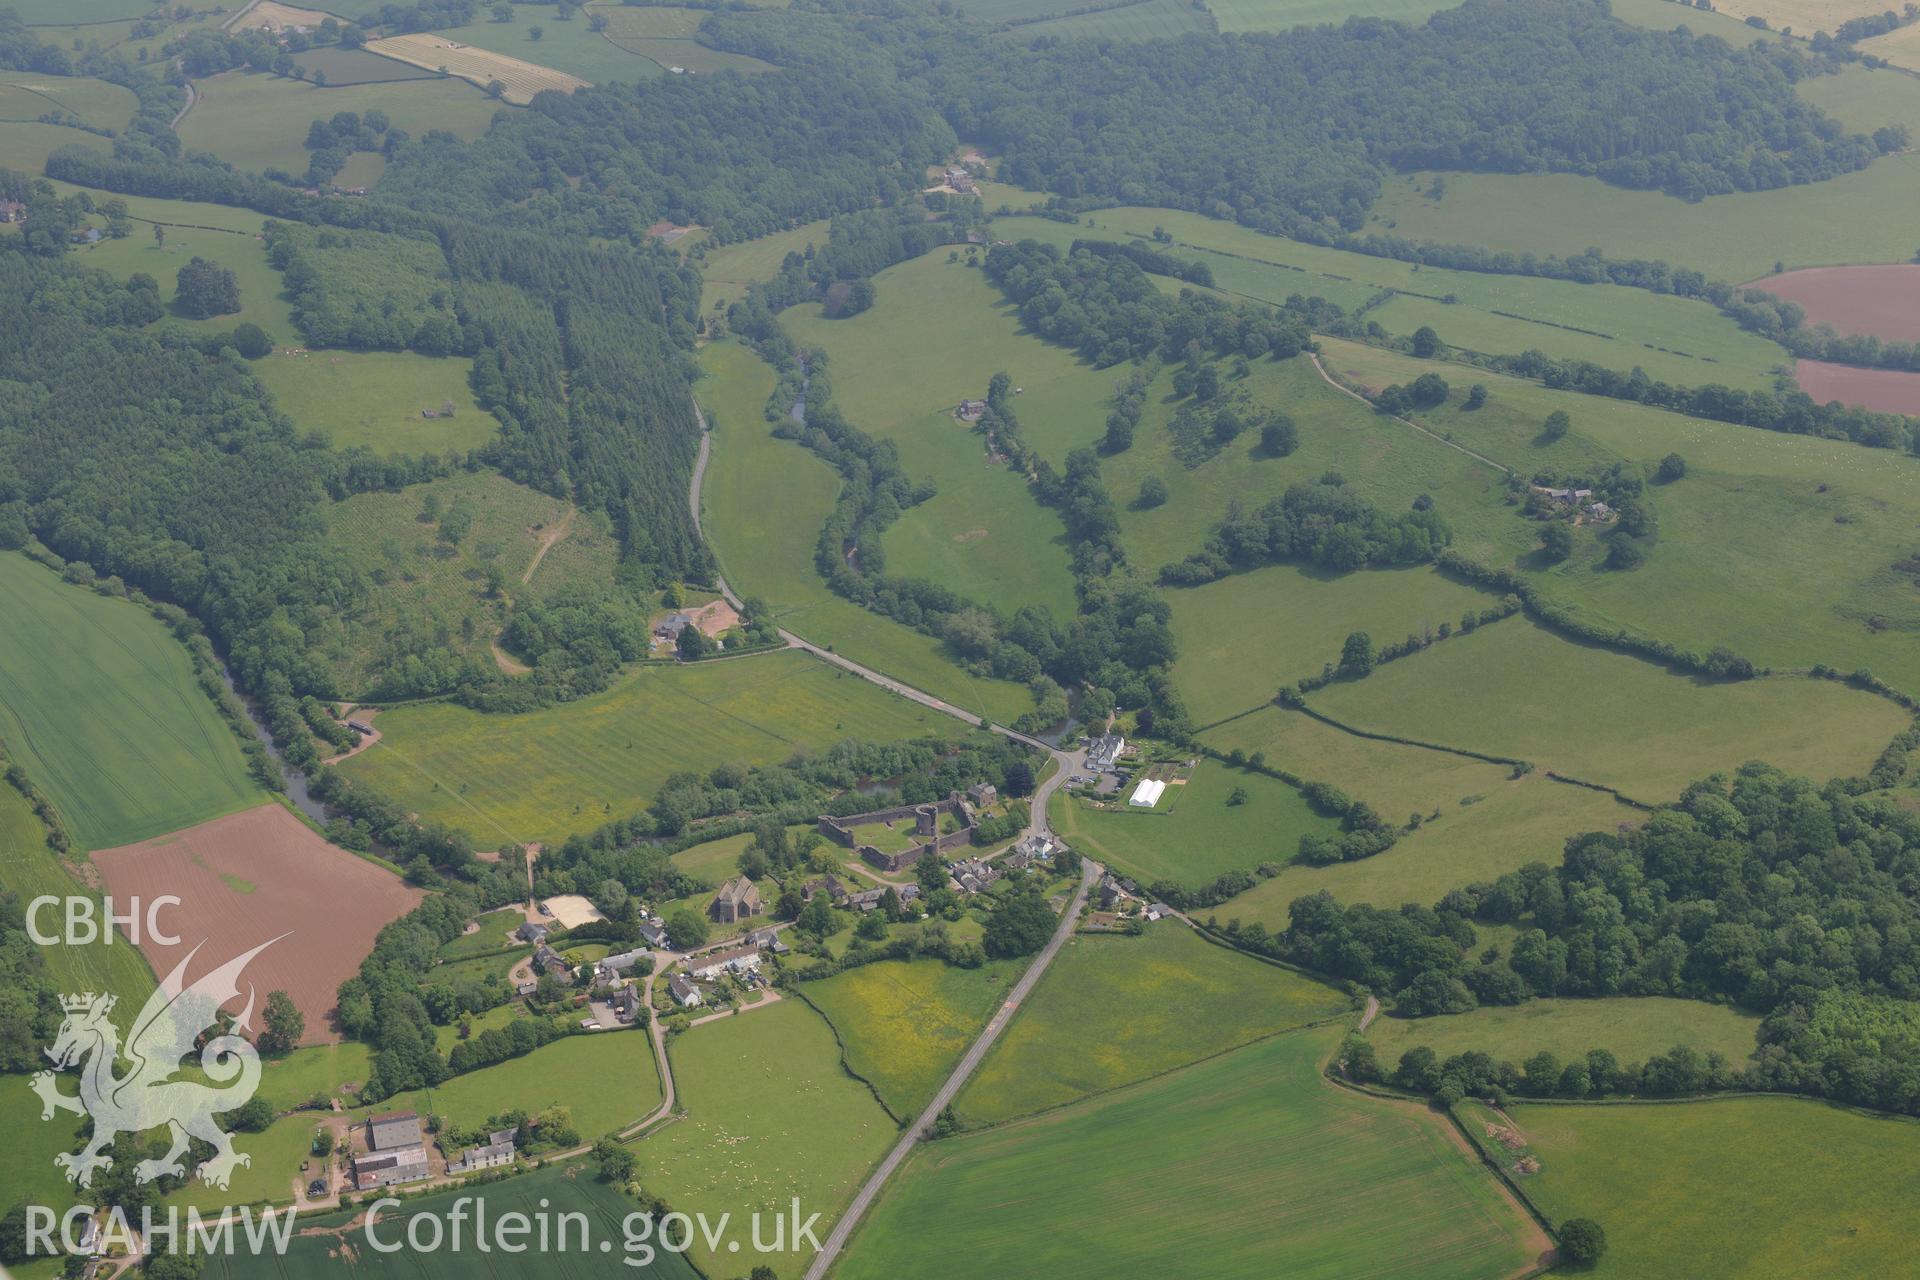 Skenfrith town including views of the castle and St. Bridget's Church. Oblique aerial photograph taken during the Royal Commission's programme of archaeological aerial reconnaissance by Toby Driver on 11th July 2015.